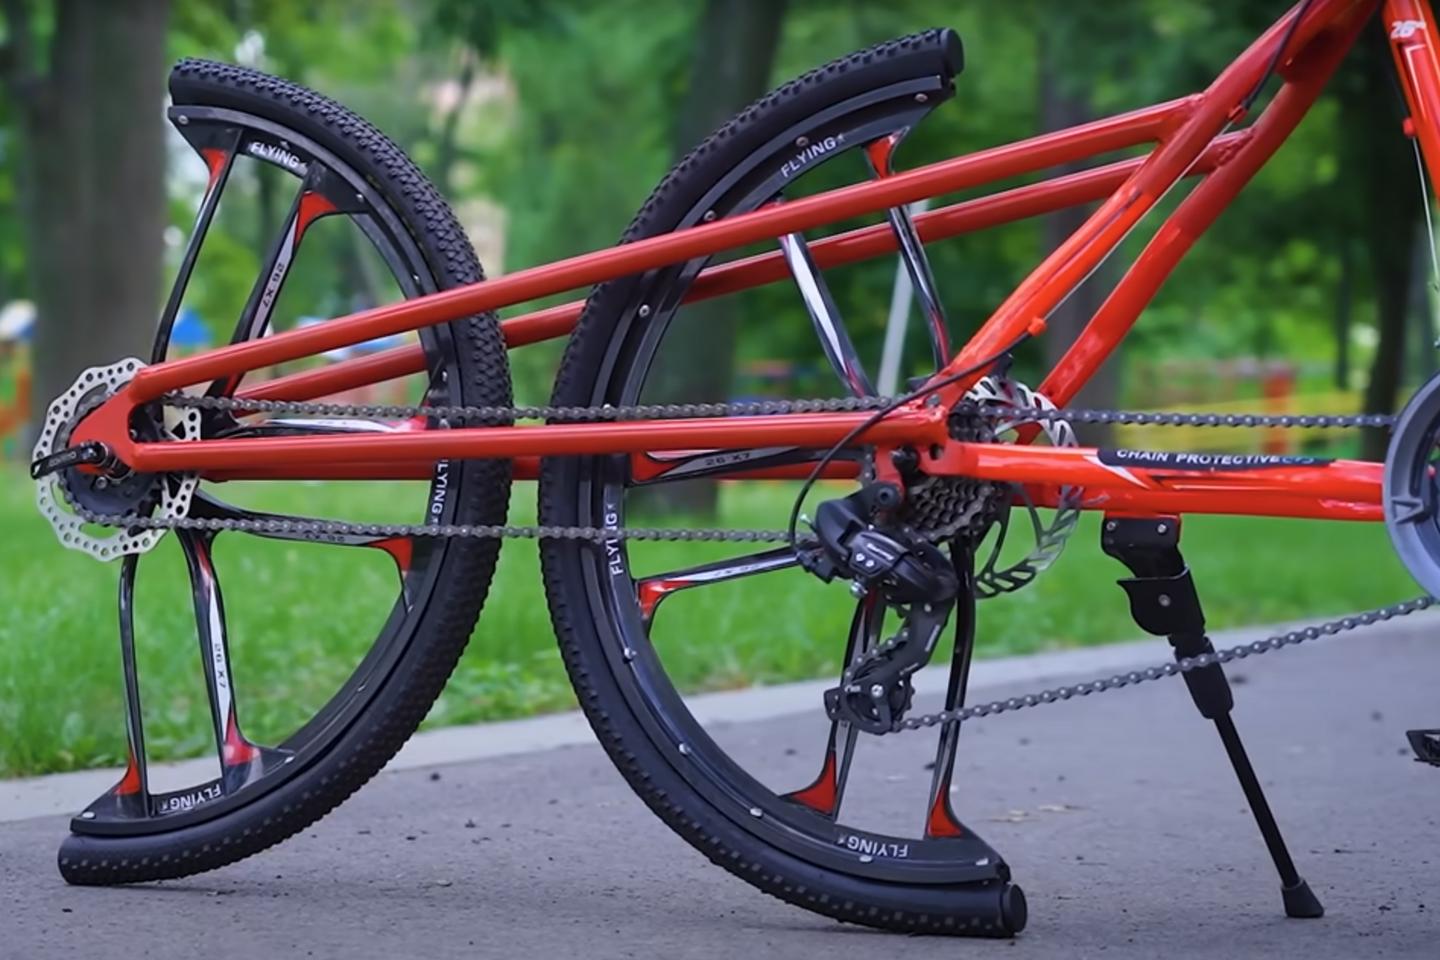 A Ukrainian YouTuber has built a bizarre but rideable bicycle with its rear wheel cut into two sections